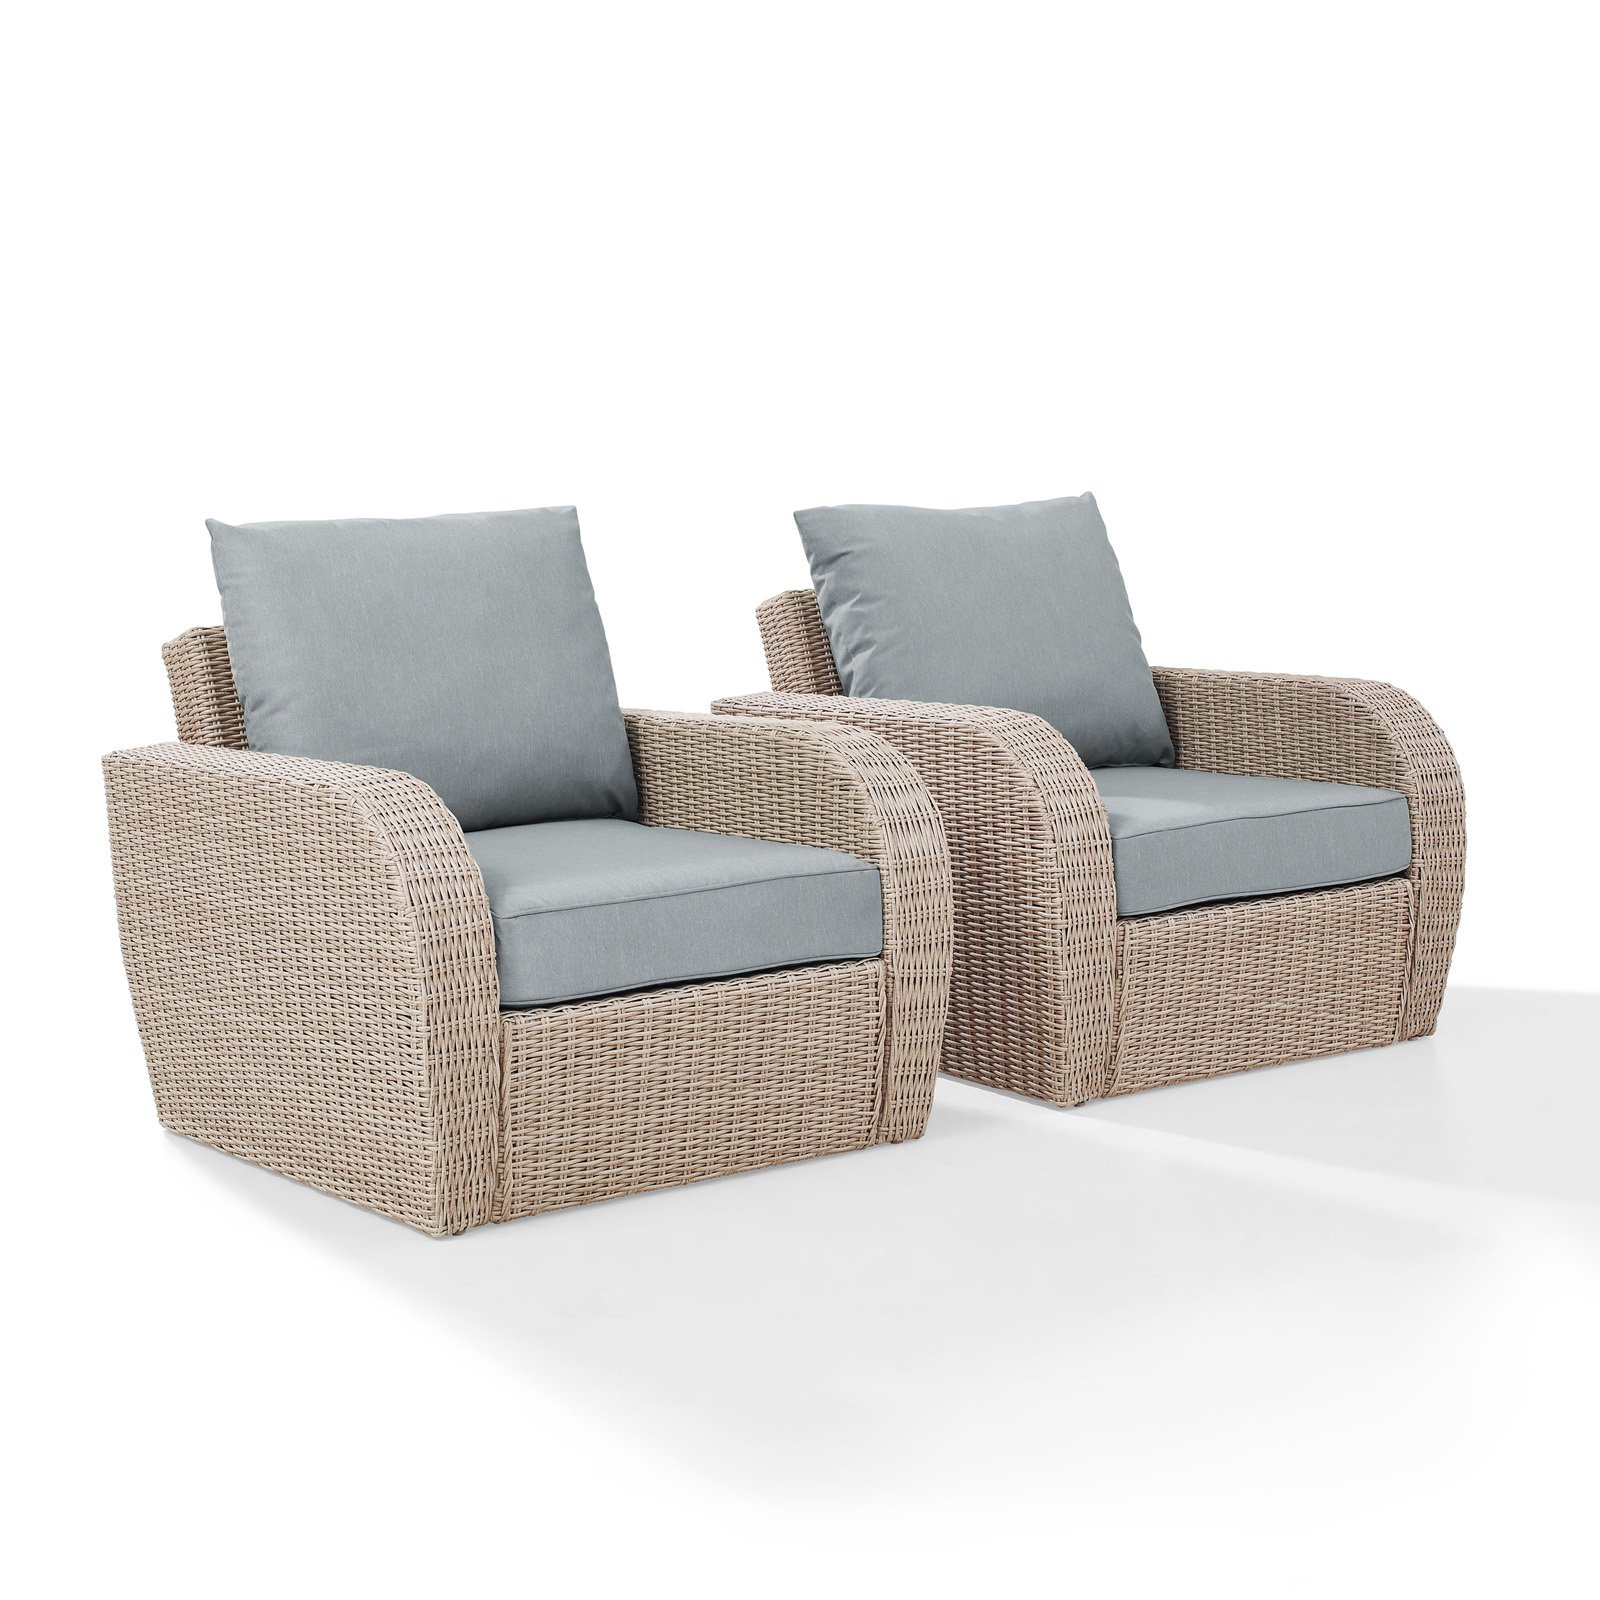 Crosley Furniture St Augustine 2 Pc Outdoor Wicker Seating Set With Mist Cushion - Two Outdoor Wicker Chairs - image 4 of 11